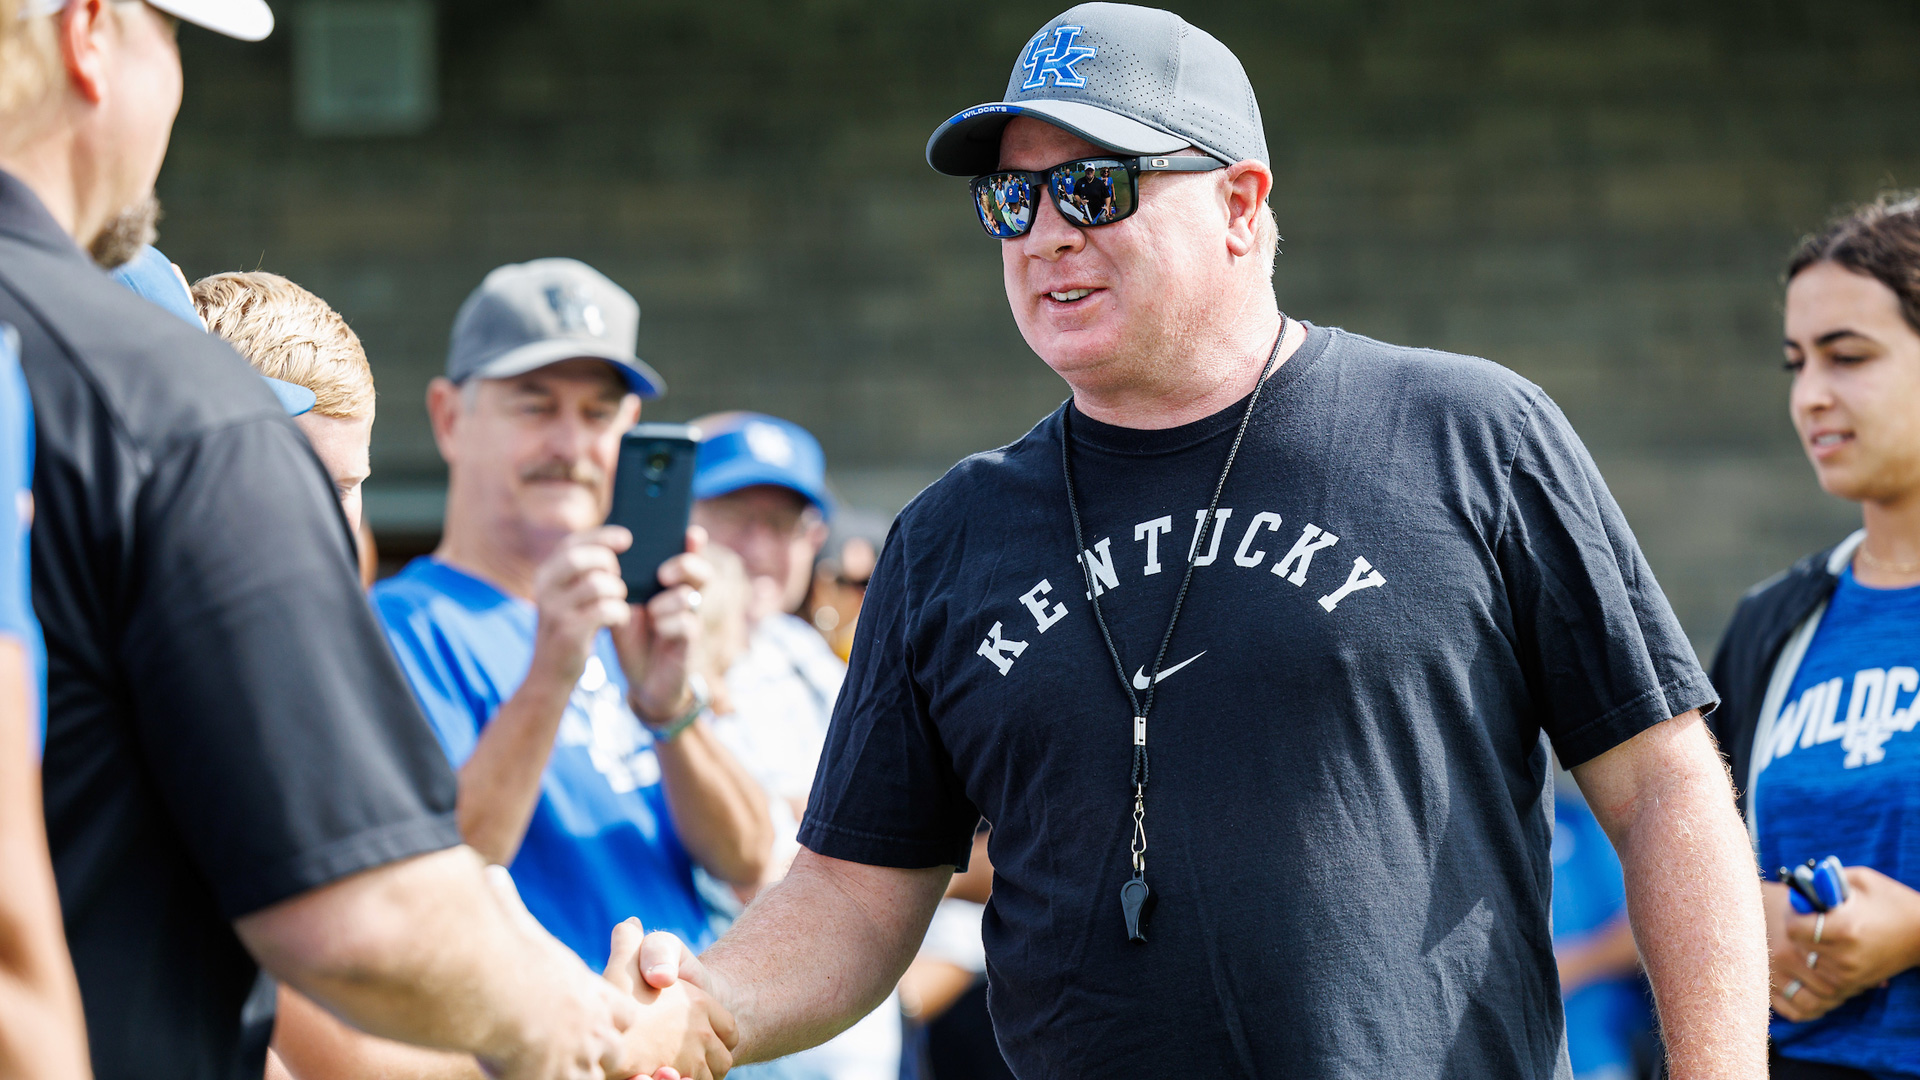 Kentucky Football Open Spring Practice to be Held April 1